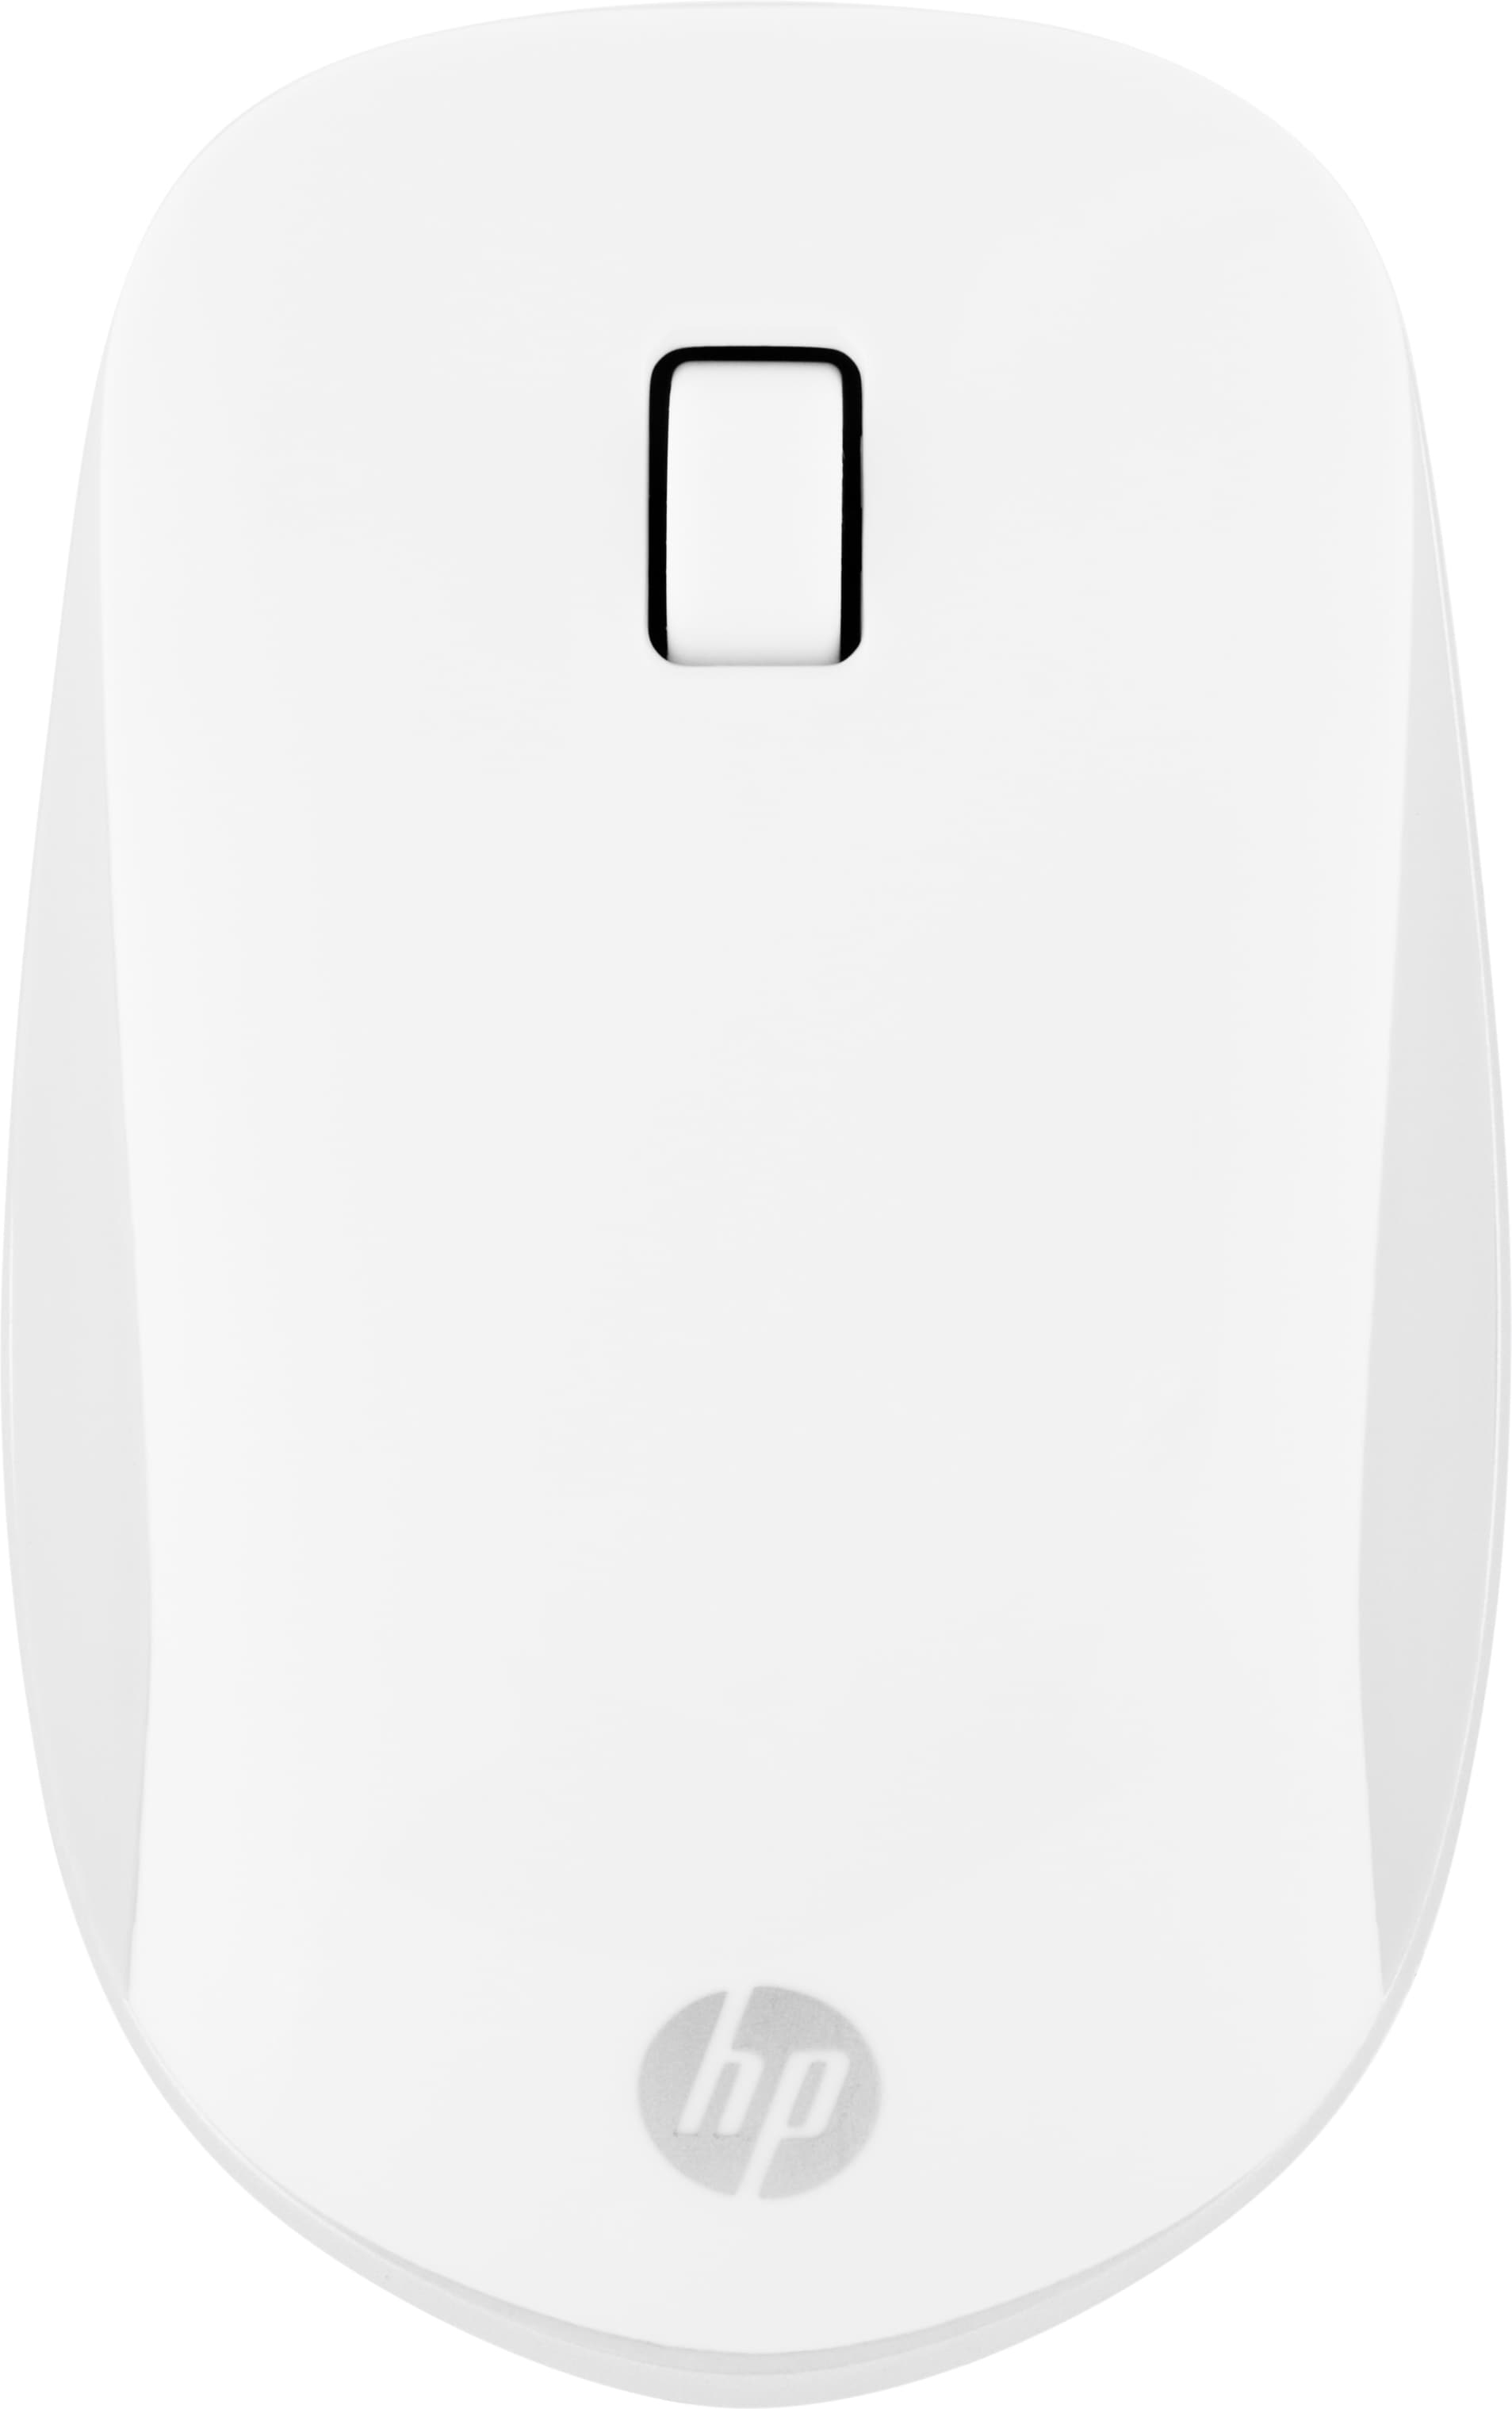 Image of HP Mouse Bluetooth 410 Slim bianco